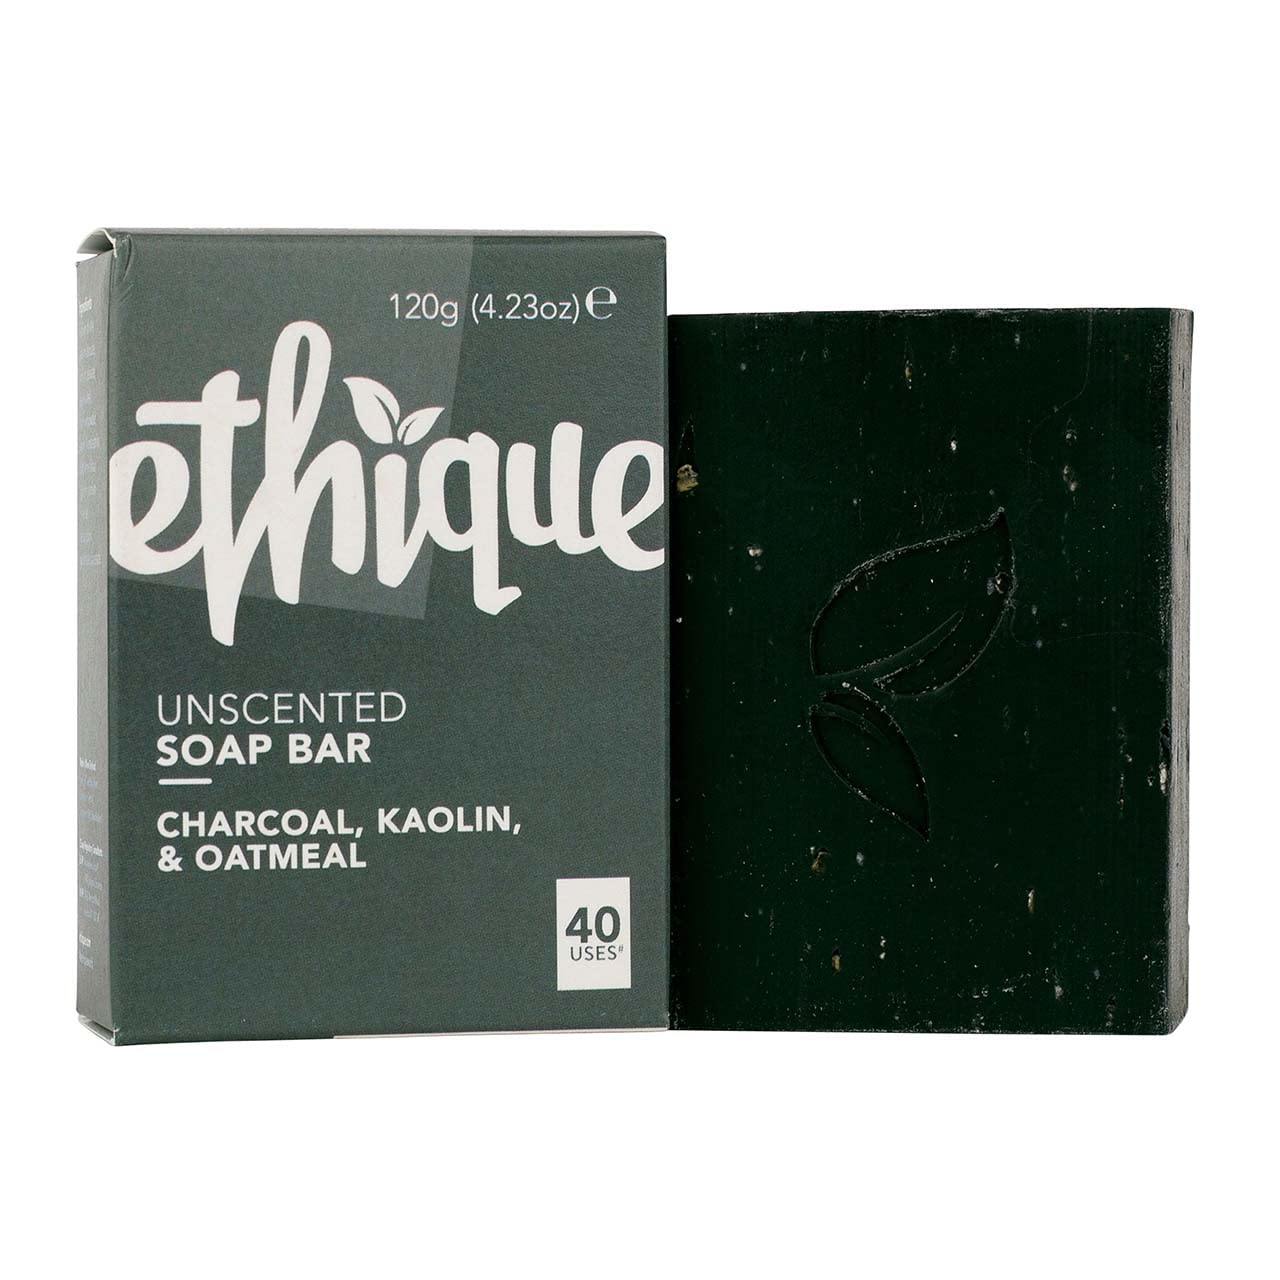 Ethique Unscented Charcoal, Kaolin, & Oatmeal Soap Bar - Body Wash for Sensitive Skin - Plastic-Free, Vegan, Cruelty-Free, Eco-Friendly, 4.23 oz (Pack of 1)